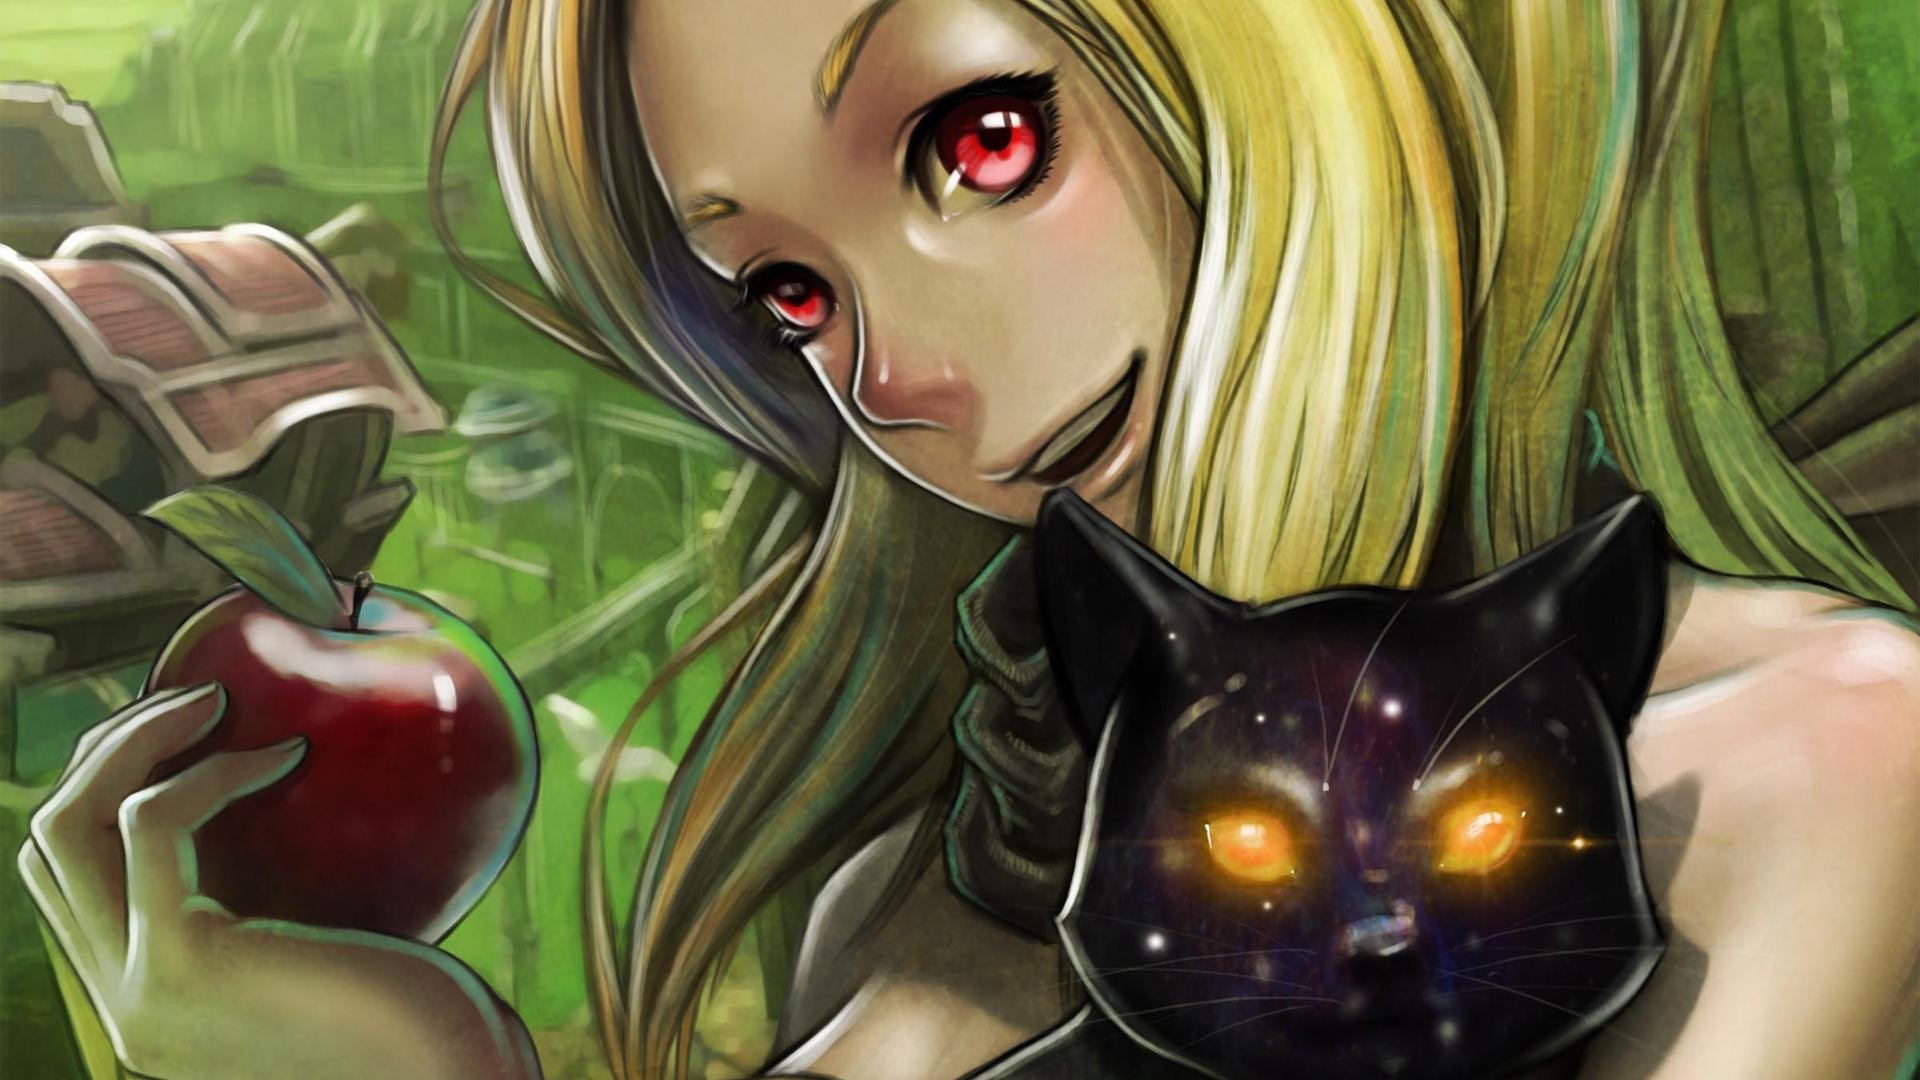 Gravity Rush Video Games Apples Cats Anime Girls Anime Red Eyes 1920x1080